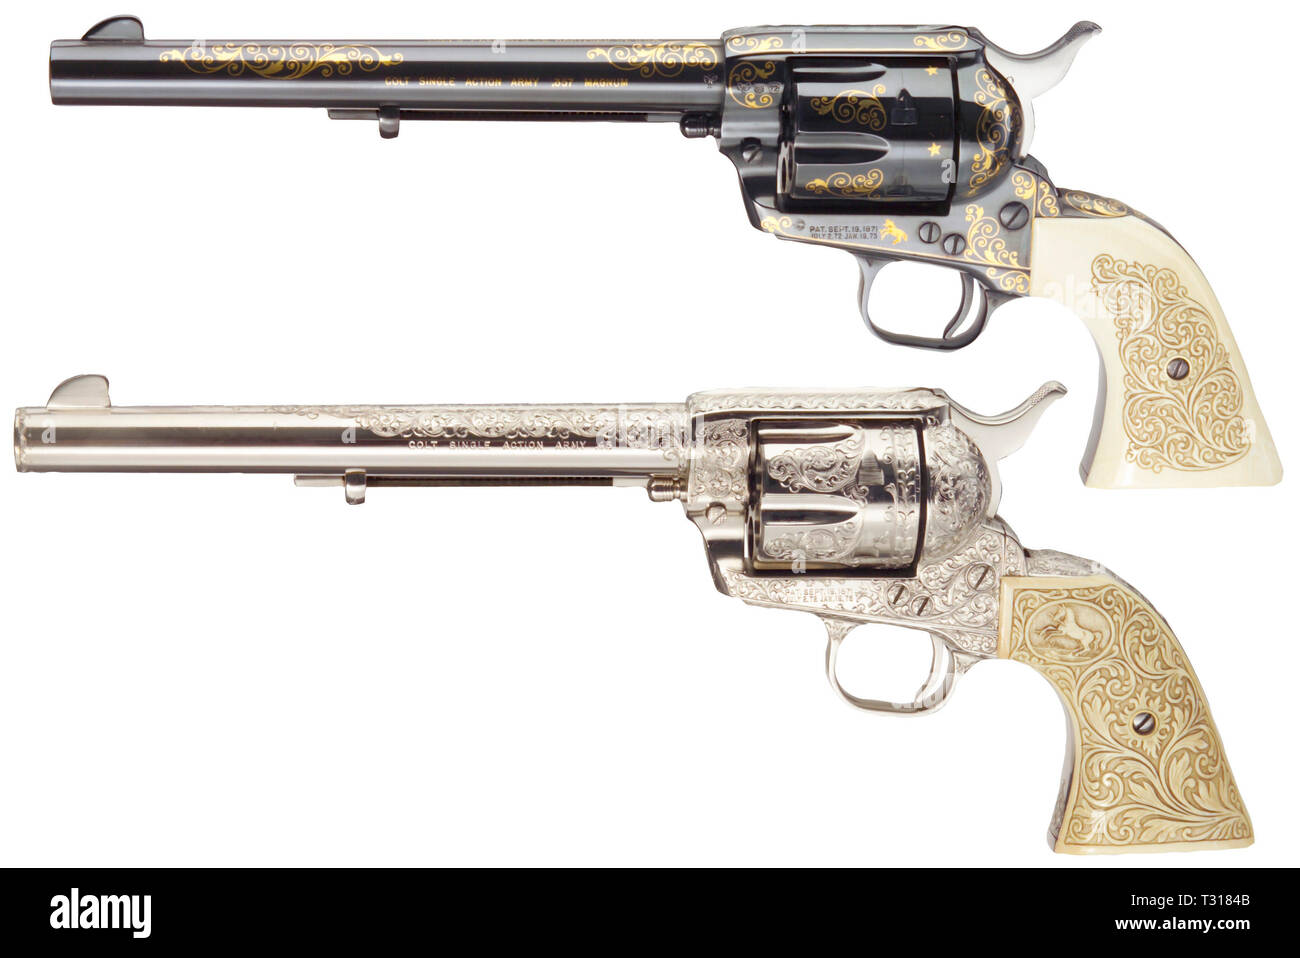 Small arms, revolver, Colt Single Action Army Model 1873 Peacemaker, caliber .45, Editorial-Use-Only Stock Photo